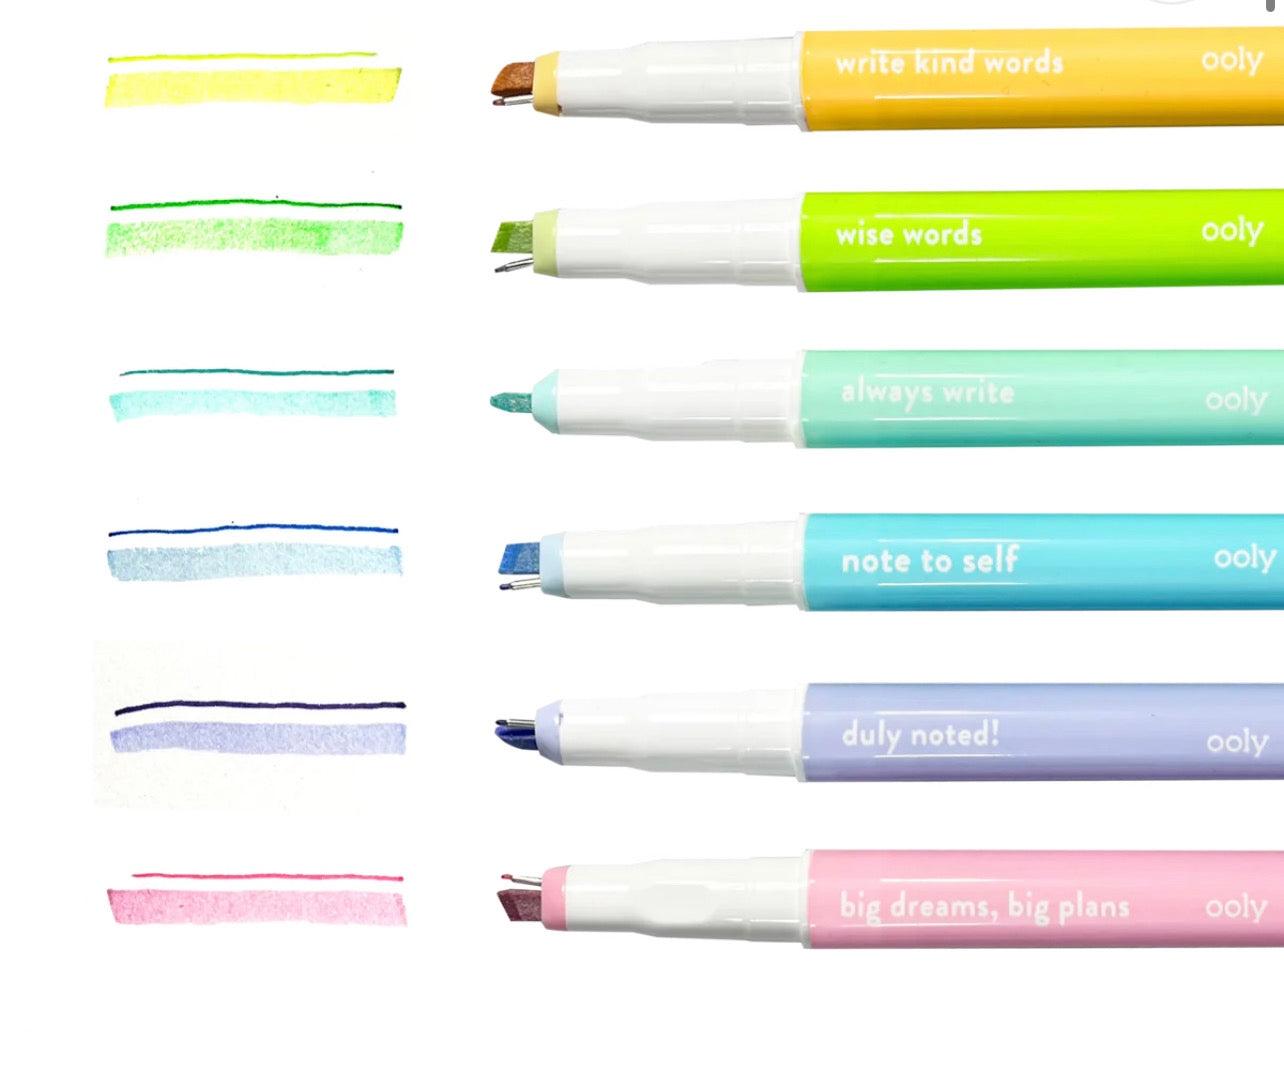 ooly Noted Pen + Highlighter, Set of 6